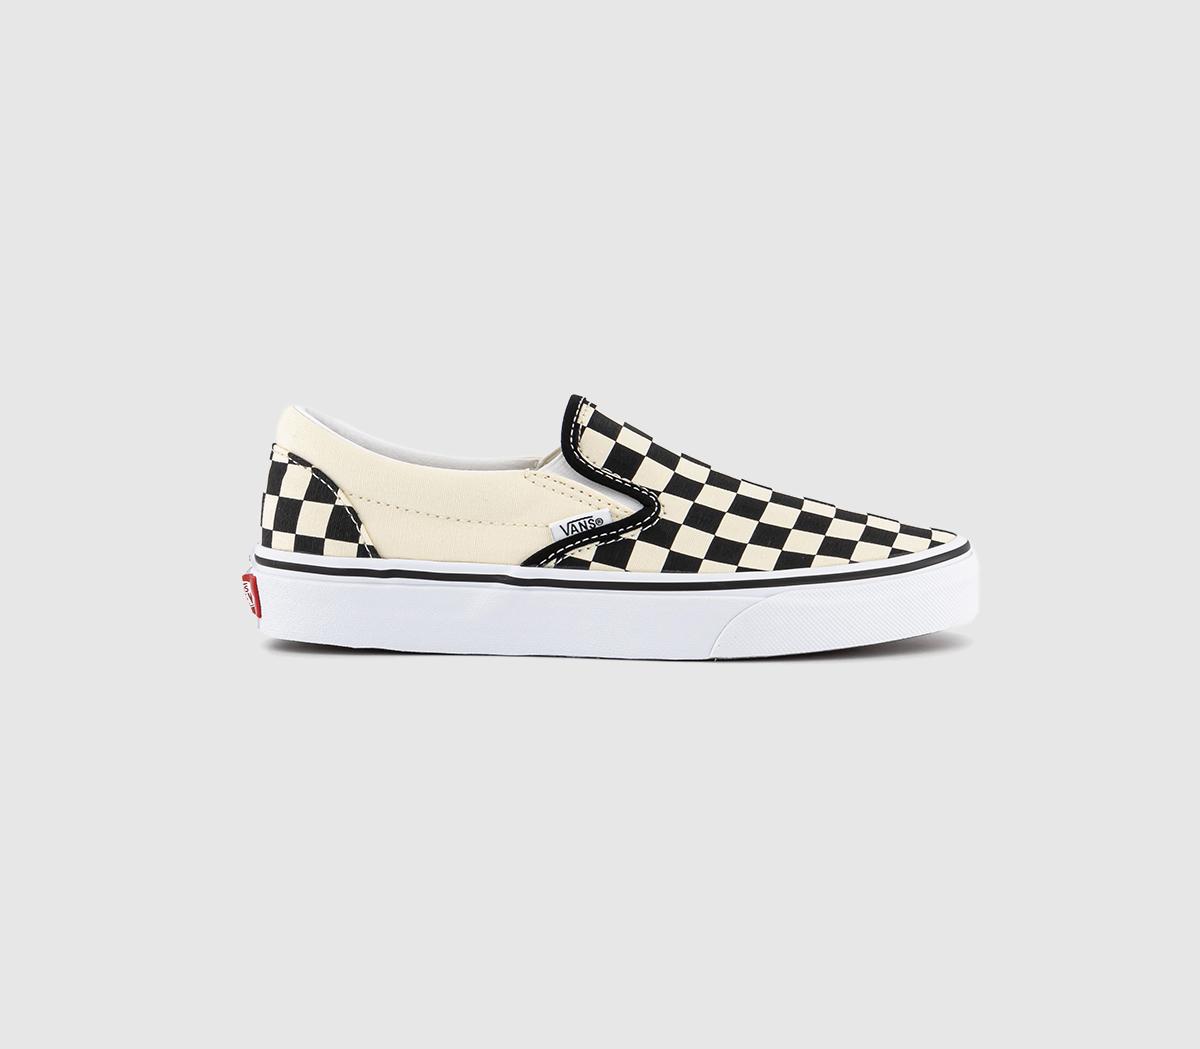 vans classic slip on trainers in black and white